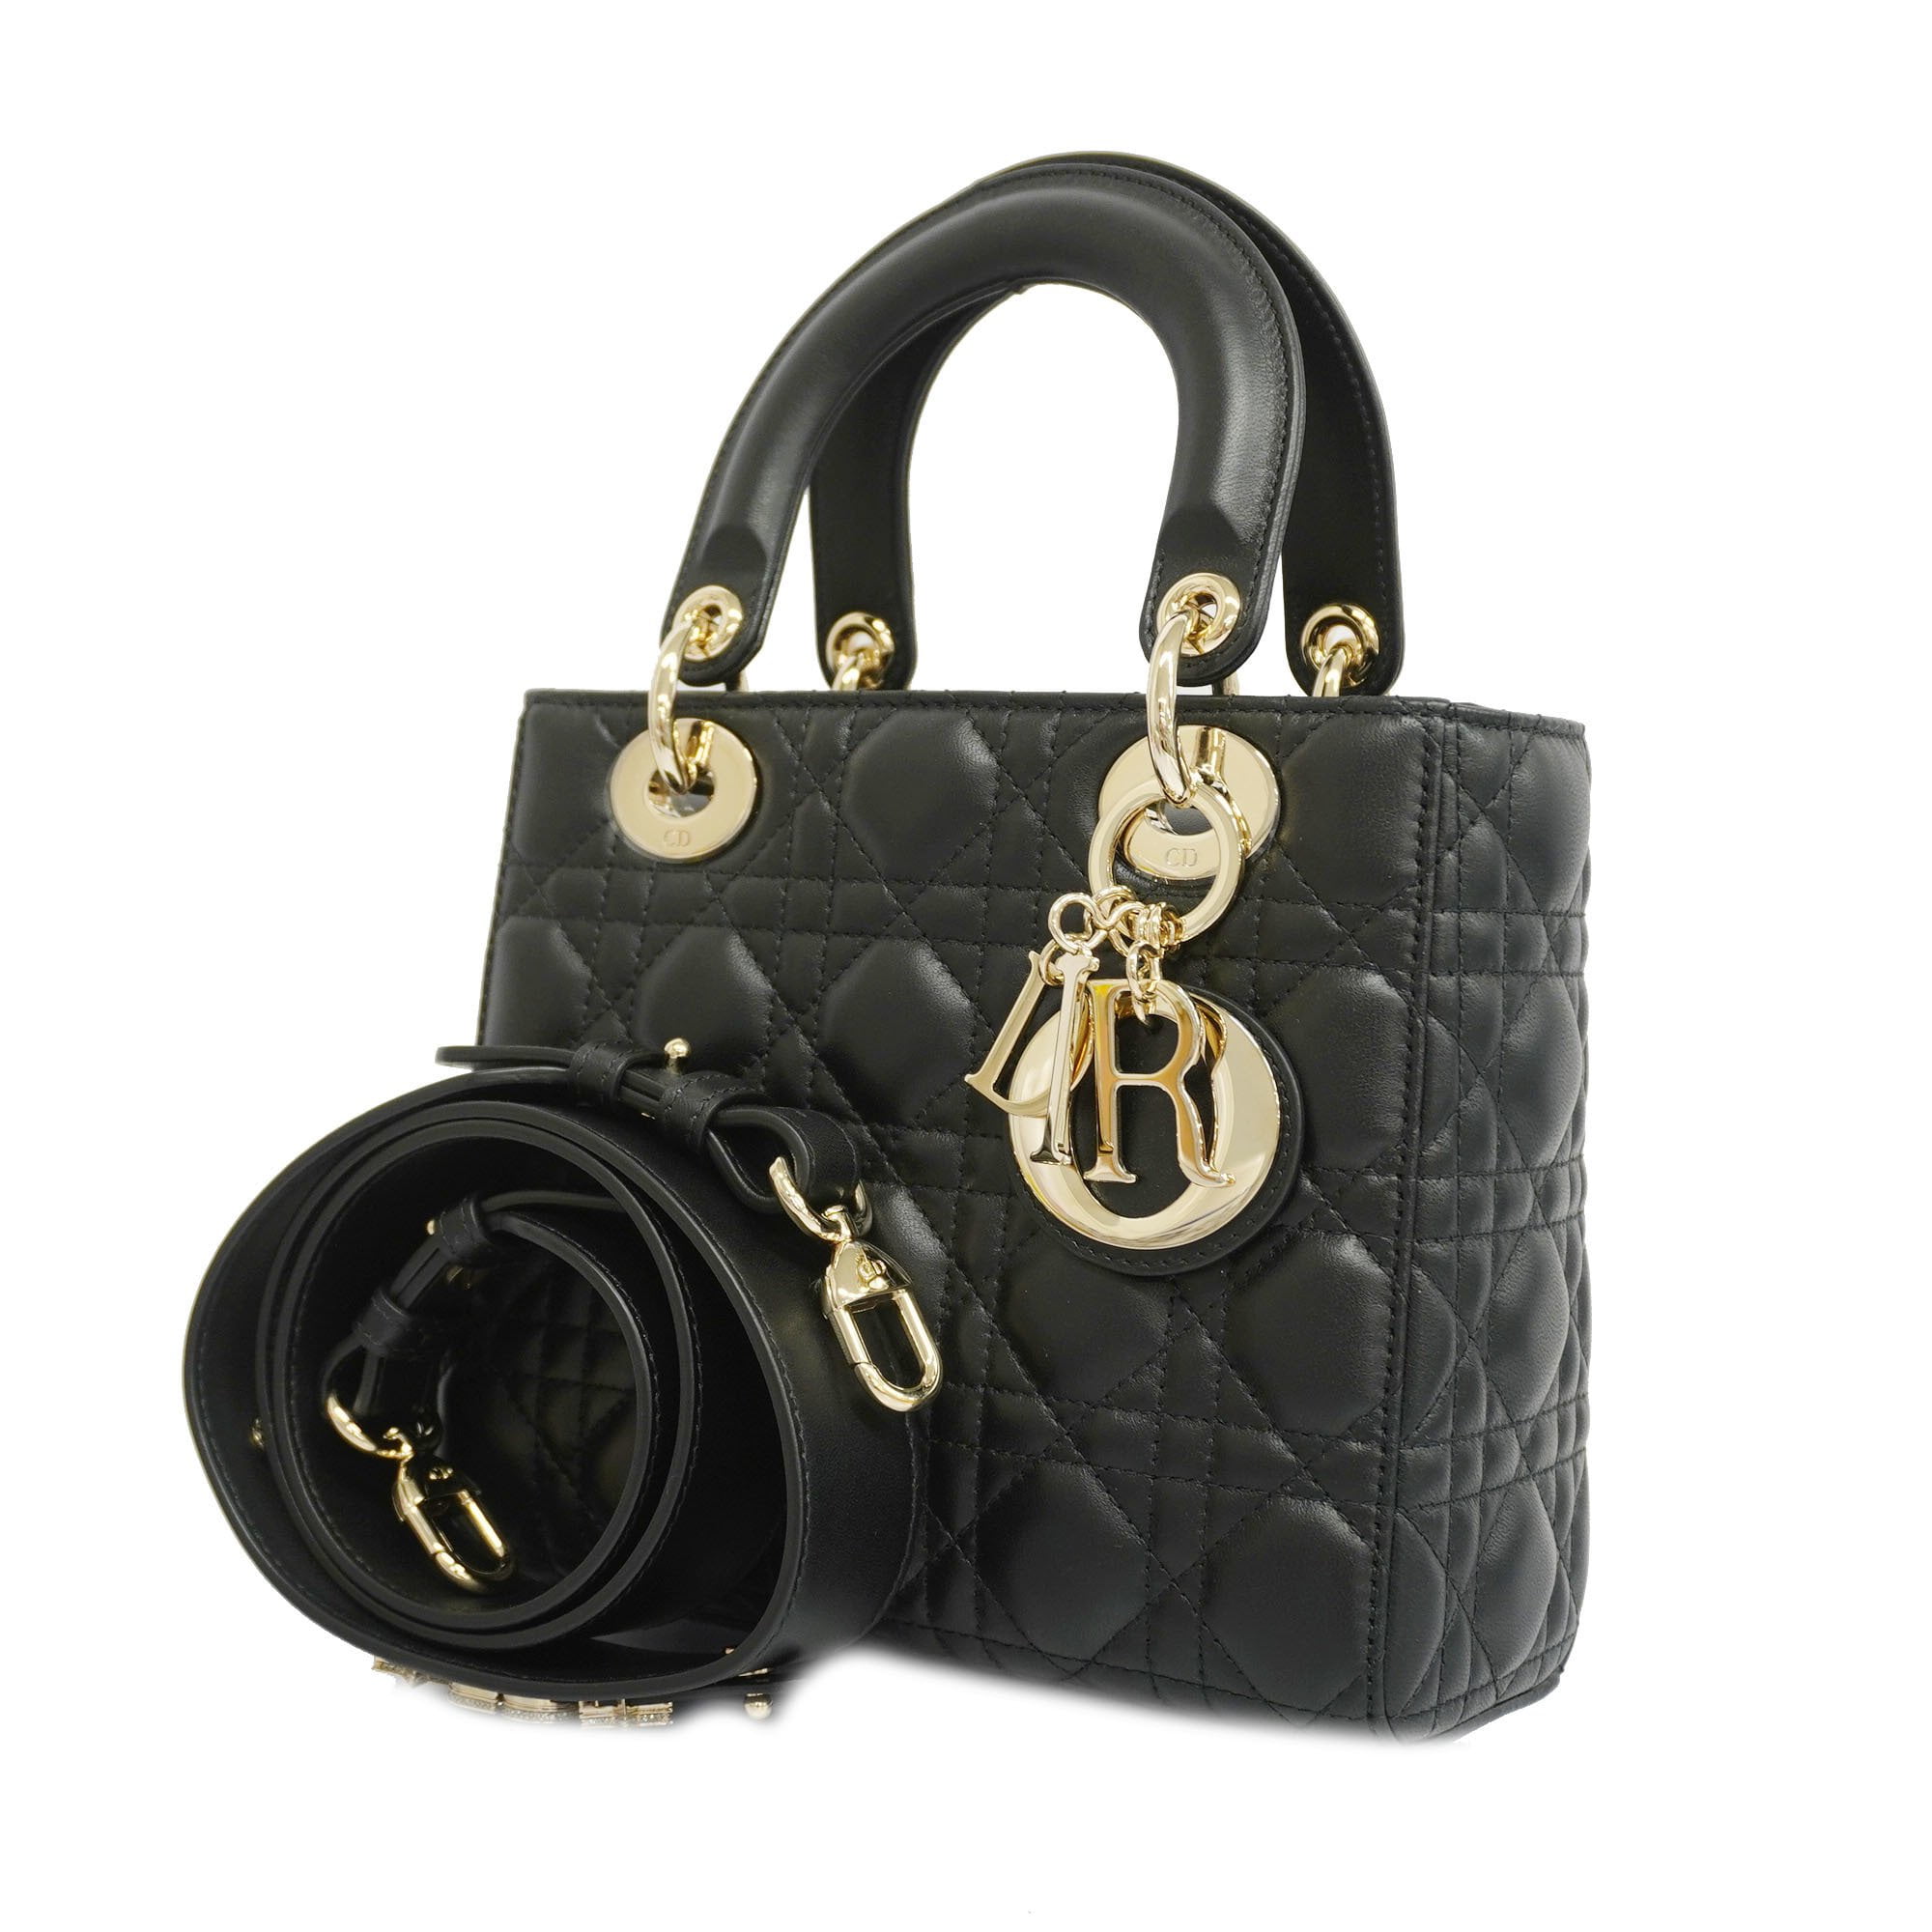 Used Lady Dior Canvas Leopard Print with Acrylic Handles  includes  attached purse charm  shoulder strap